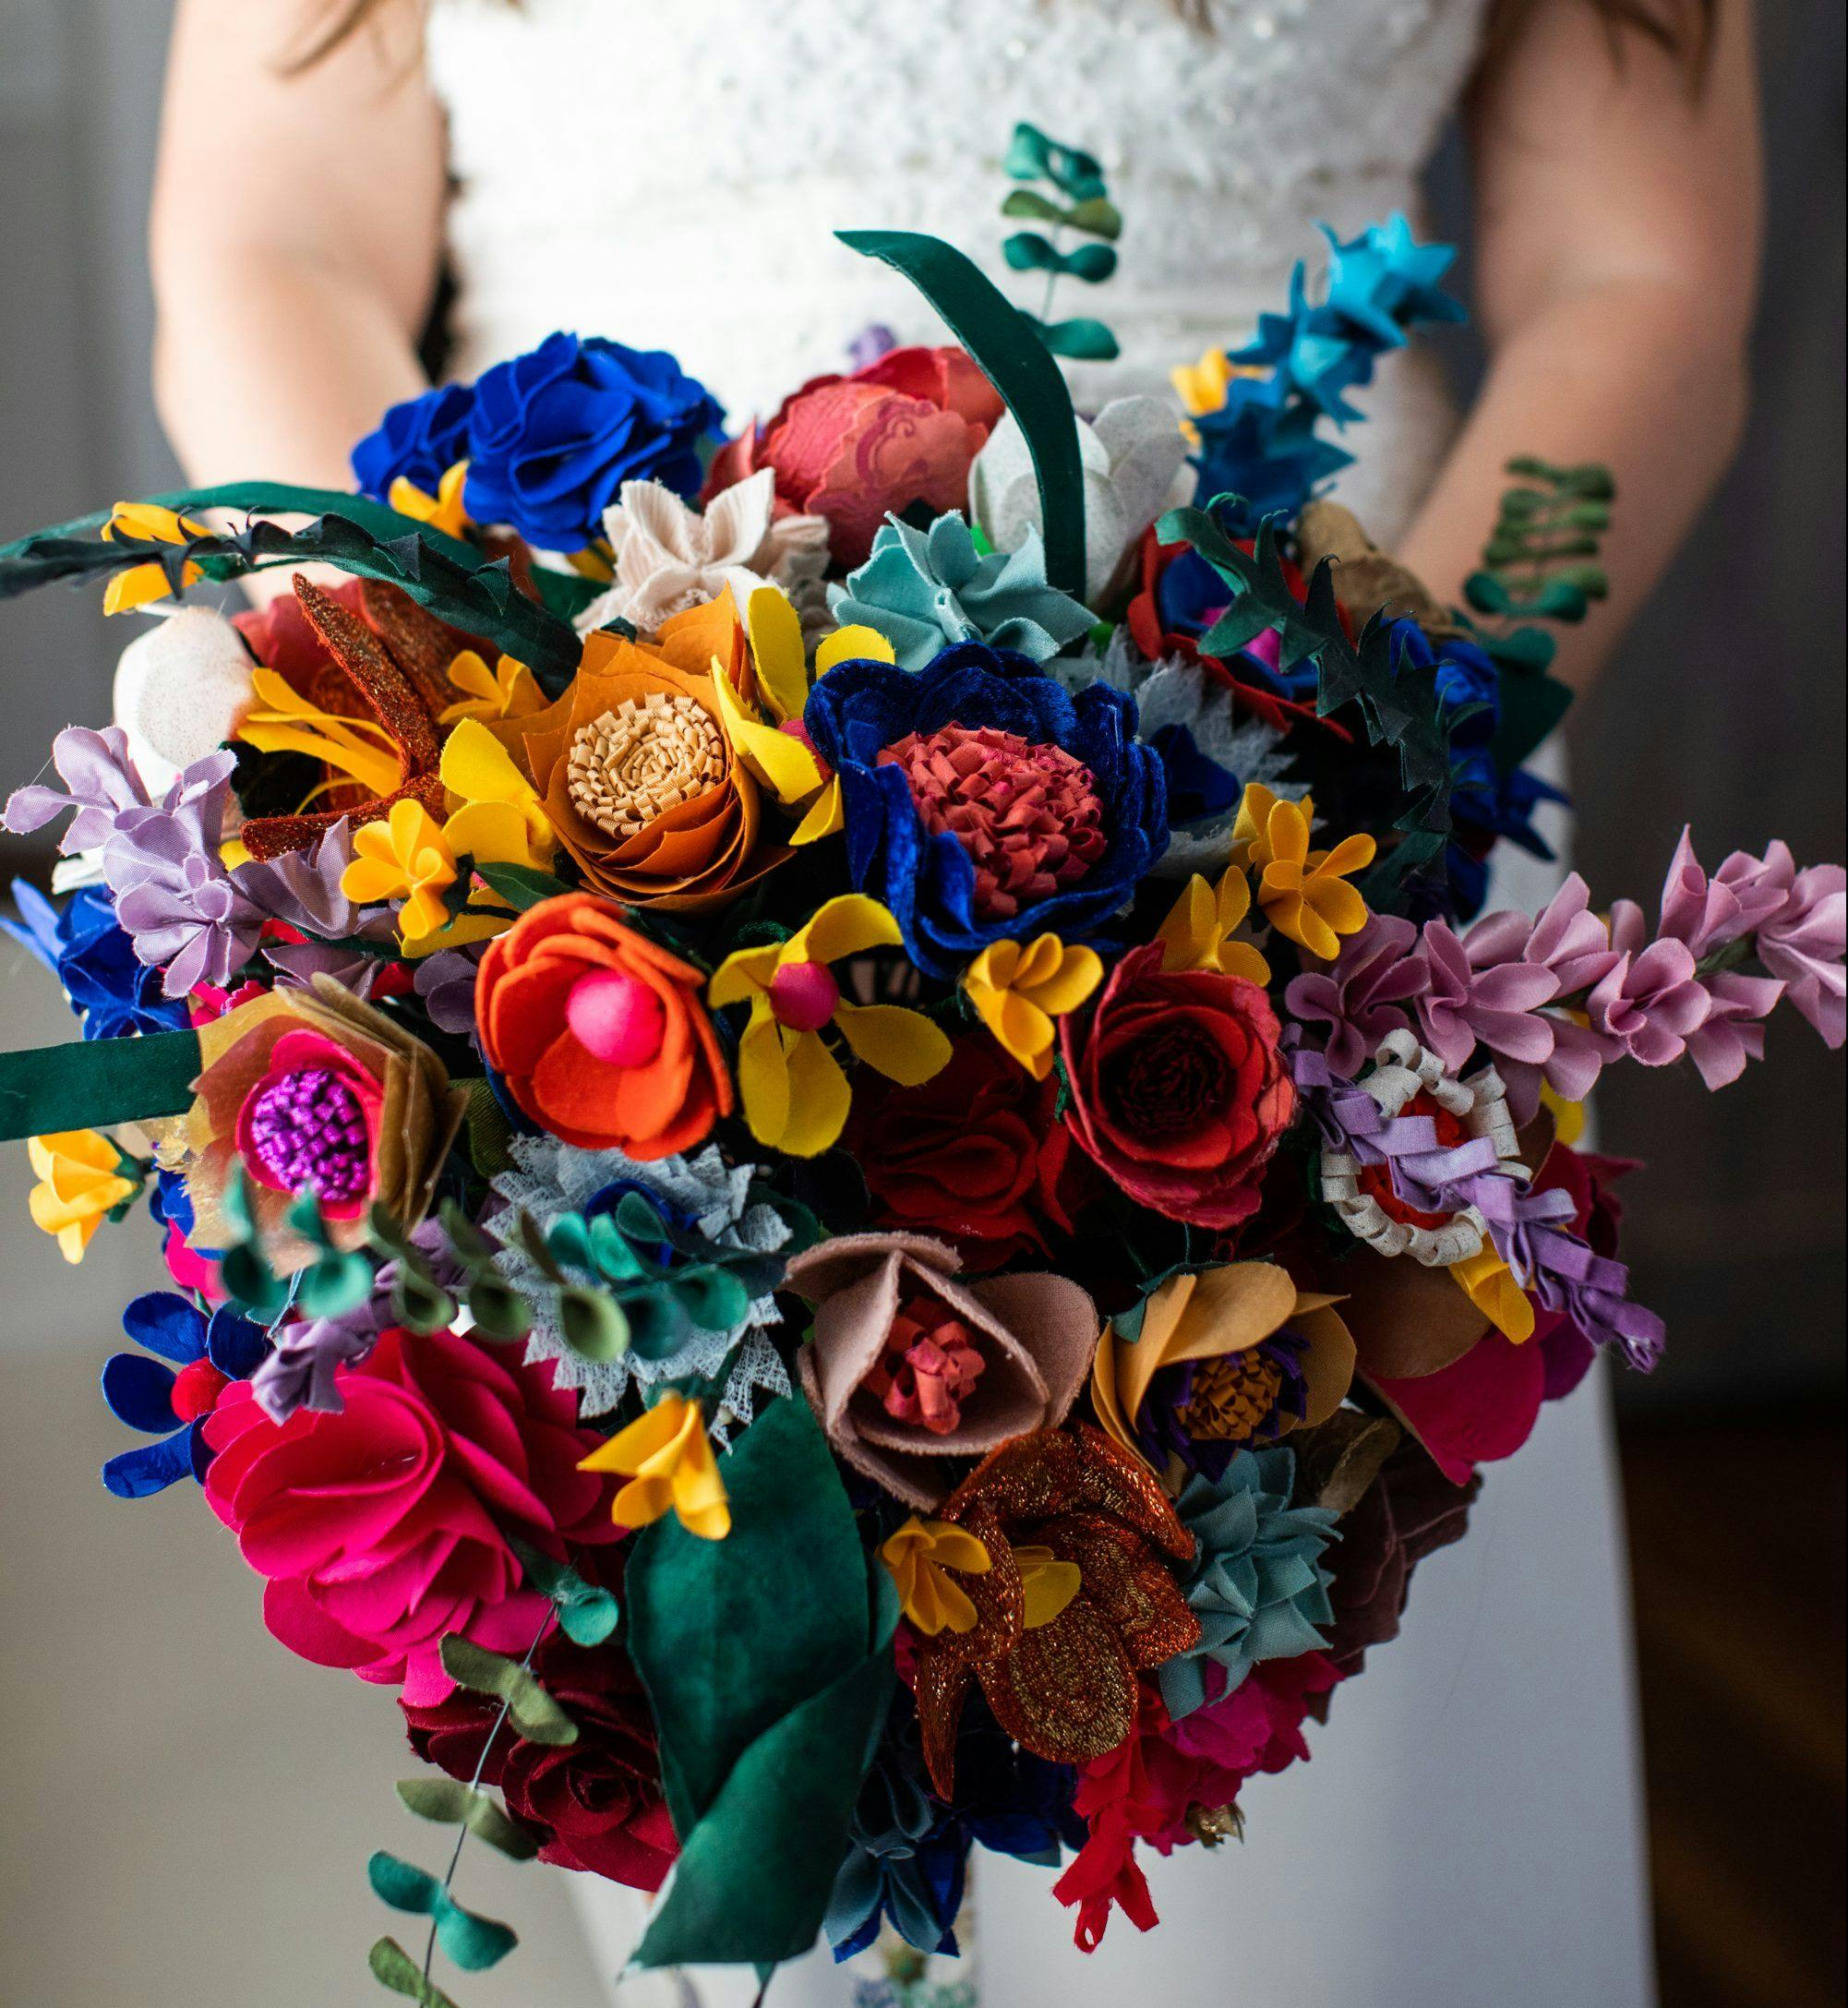 A bride in a white dress holding her bouquet. The bouquet is made of fabric flowers in various jewel tones and is quite large.